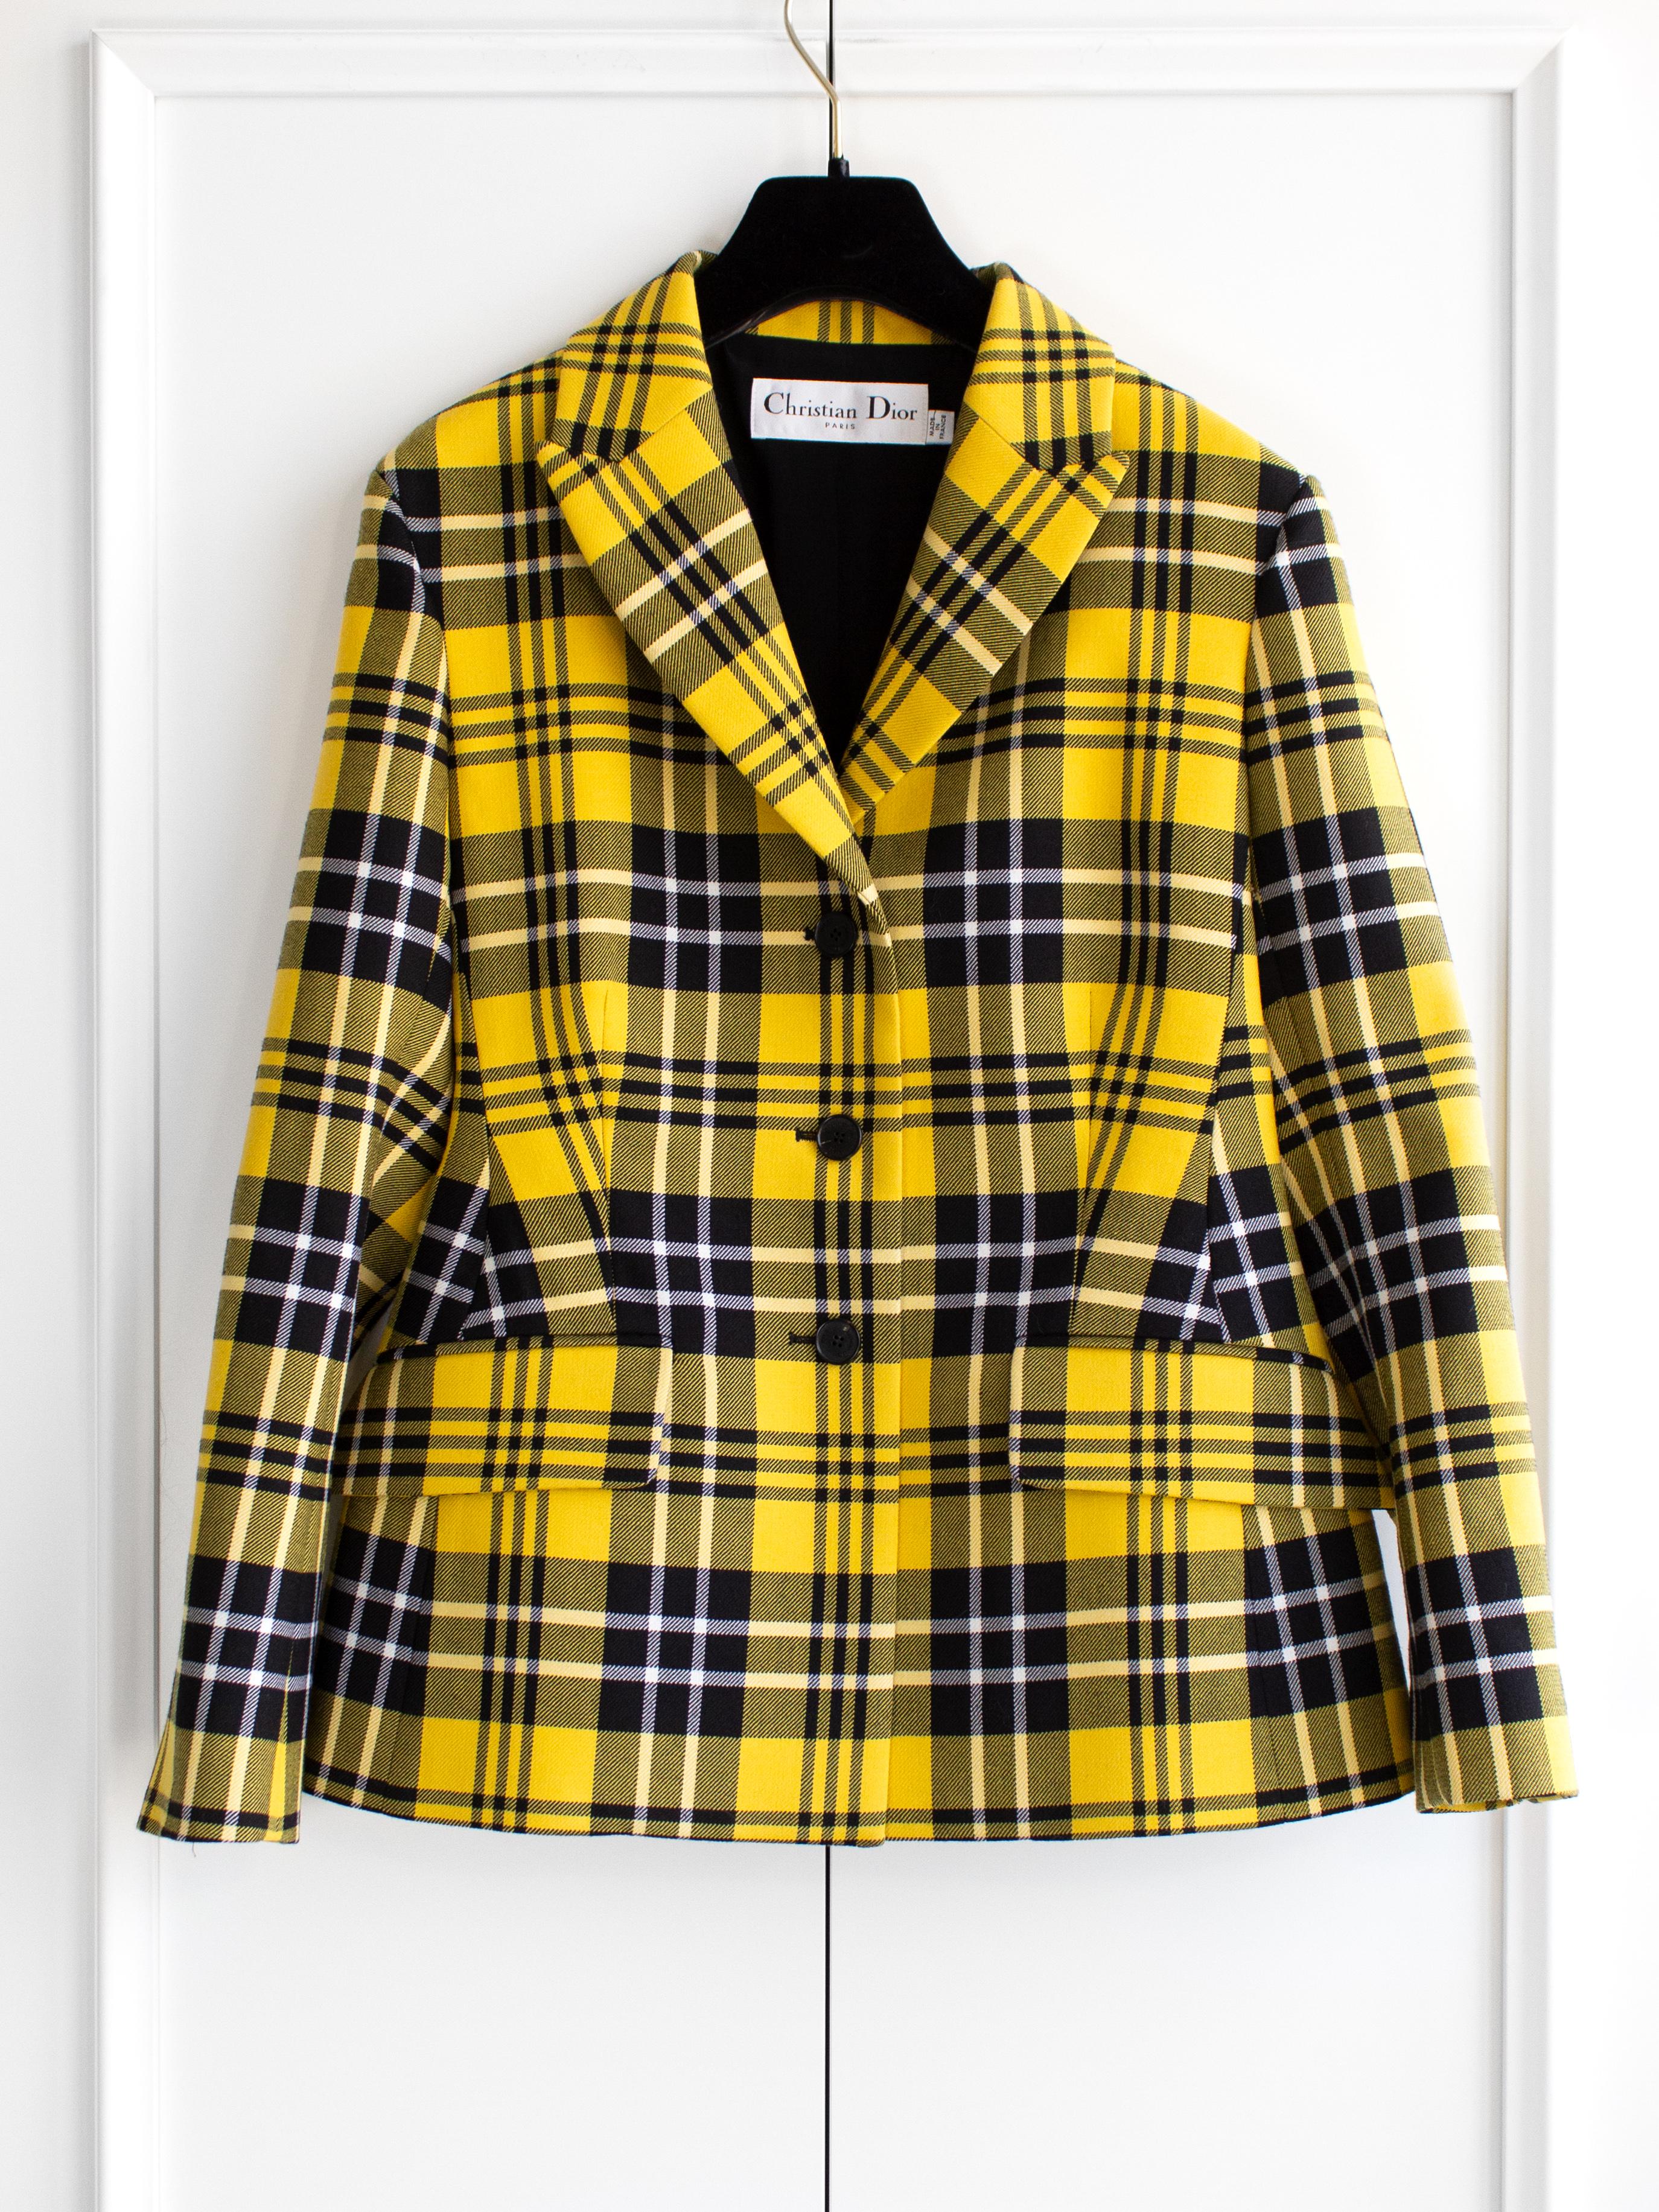 Check out the hottest item from Dior's Fall/Winter 2022 collection – the yellow and black plaid bar blazer. It's got that school uniform vibe, with a nod to Cher Horowitz's iconic 'Clueless' look. This blazer has been spotted on celebs like Olivia